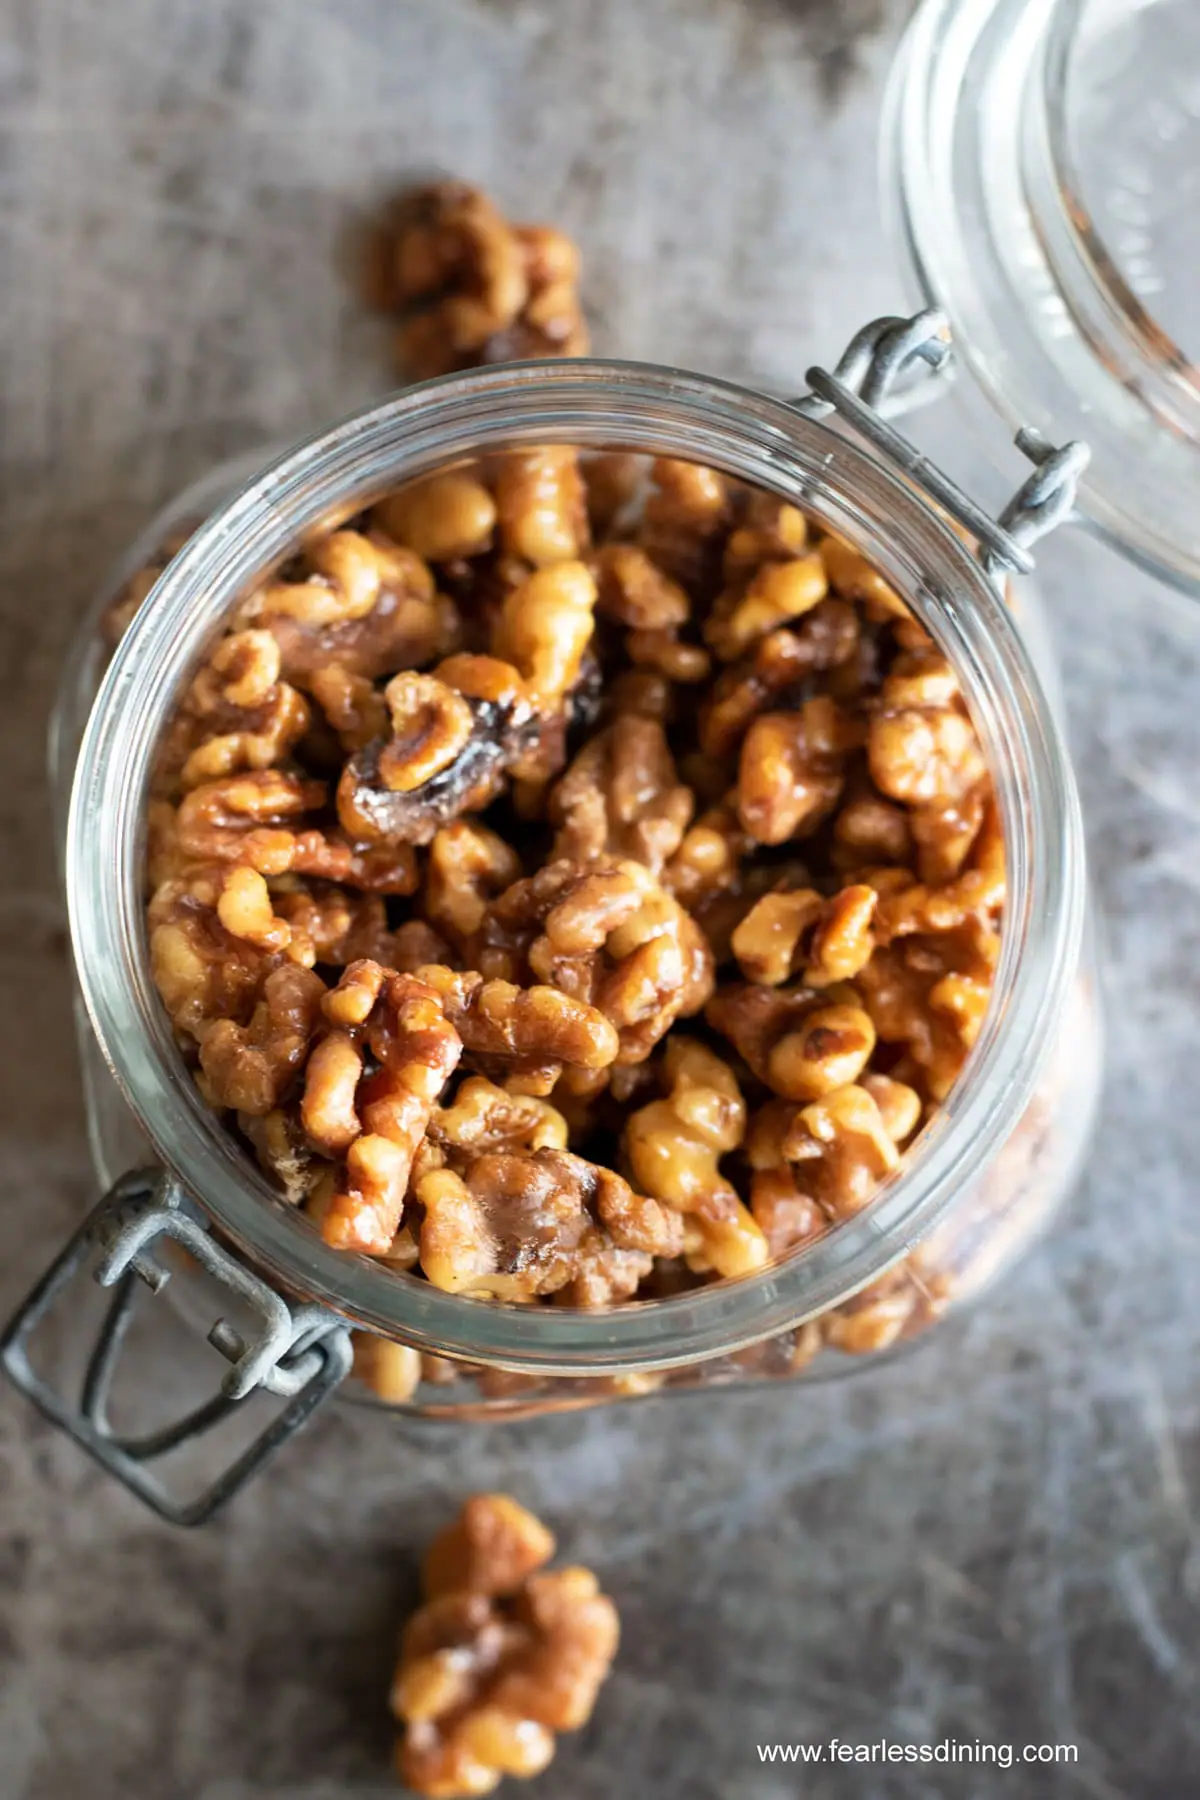 Homemade cinnamon walnuts: Place in a cute jar and give as a gift!